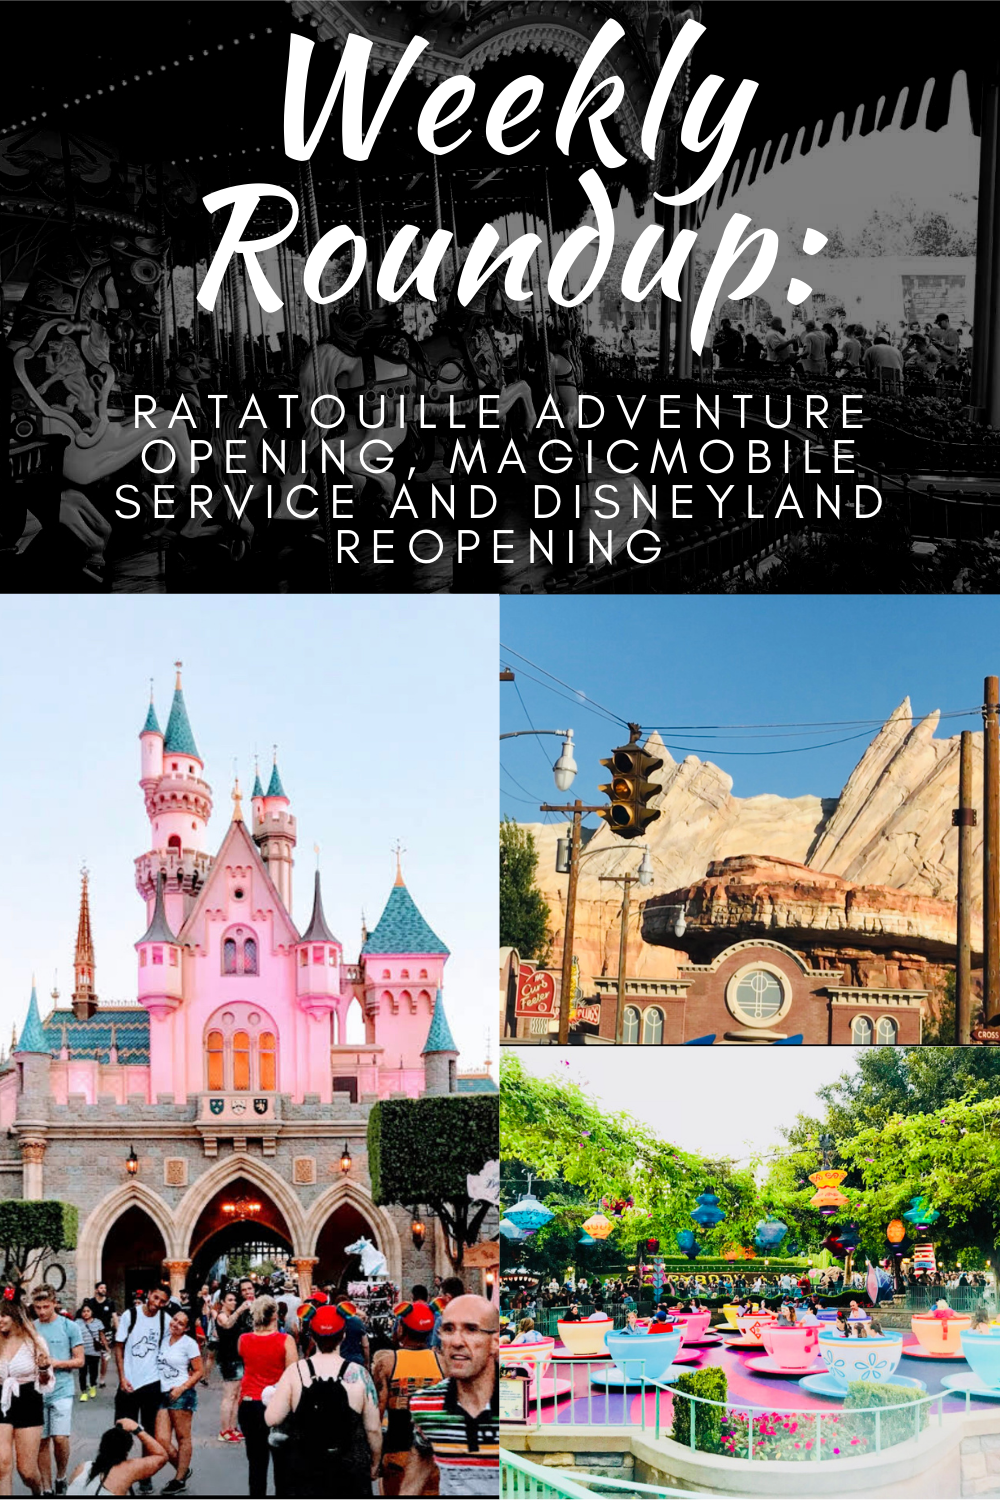 Weekly Roundup: Ratatouille Adventure Opening, MagicMobile Service and Disneyland Reopening